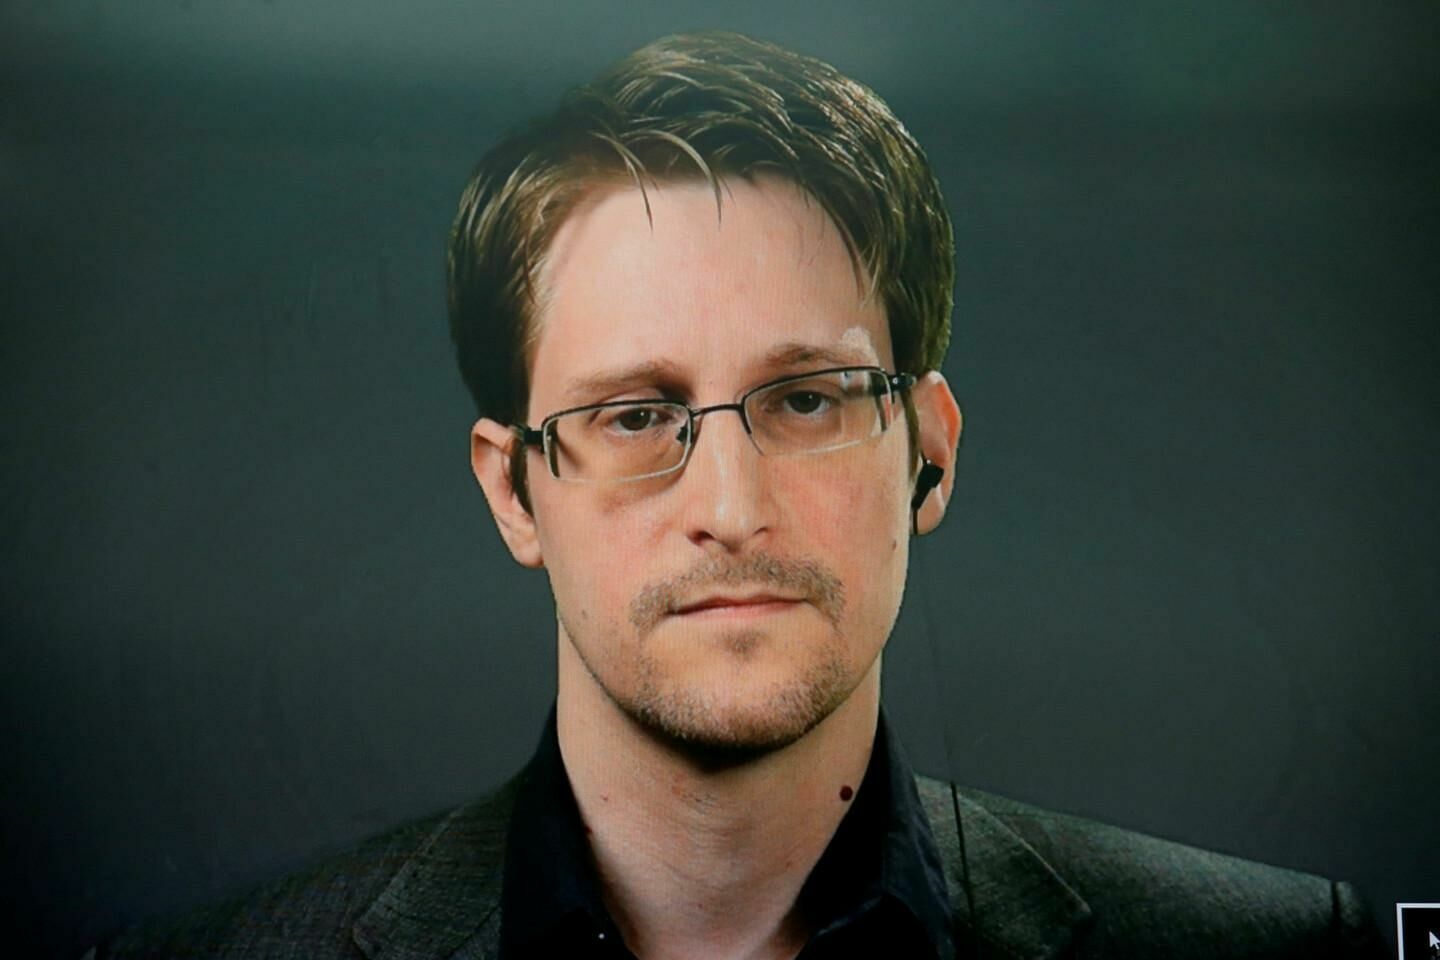 Snowden decided to become a citizen of Russia